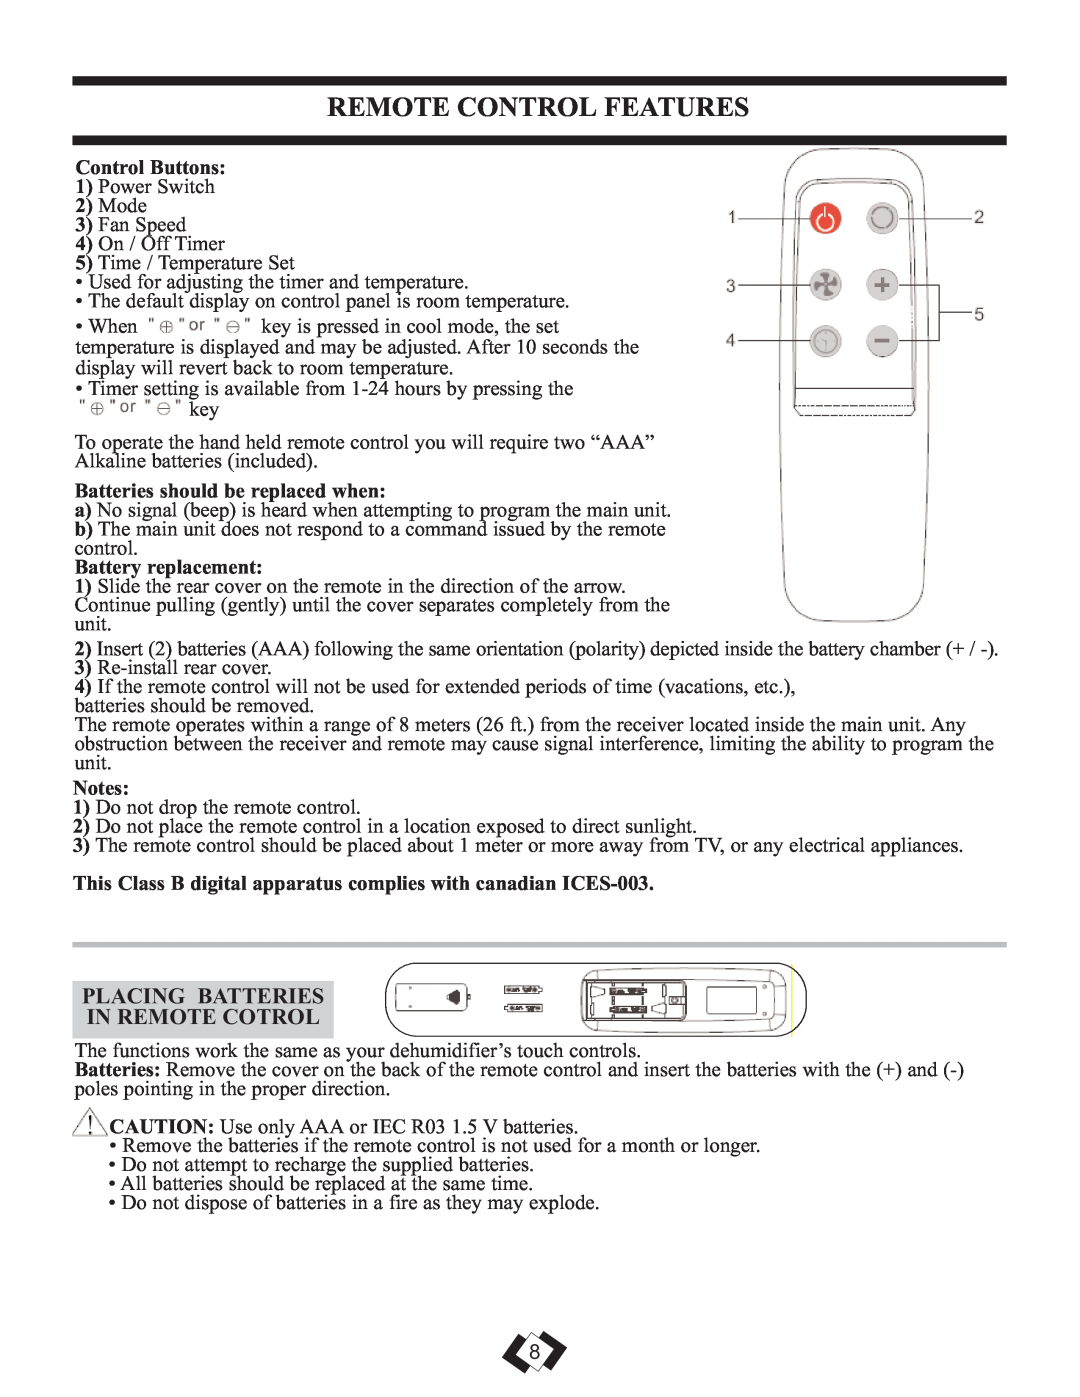 Danby DPAC 12099 manual Remote Control Features, Control Buttons, Batteries should be replaced when, Battery replacement 